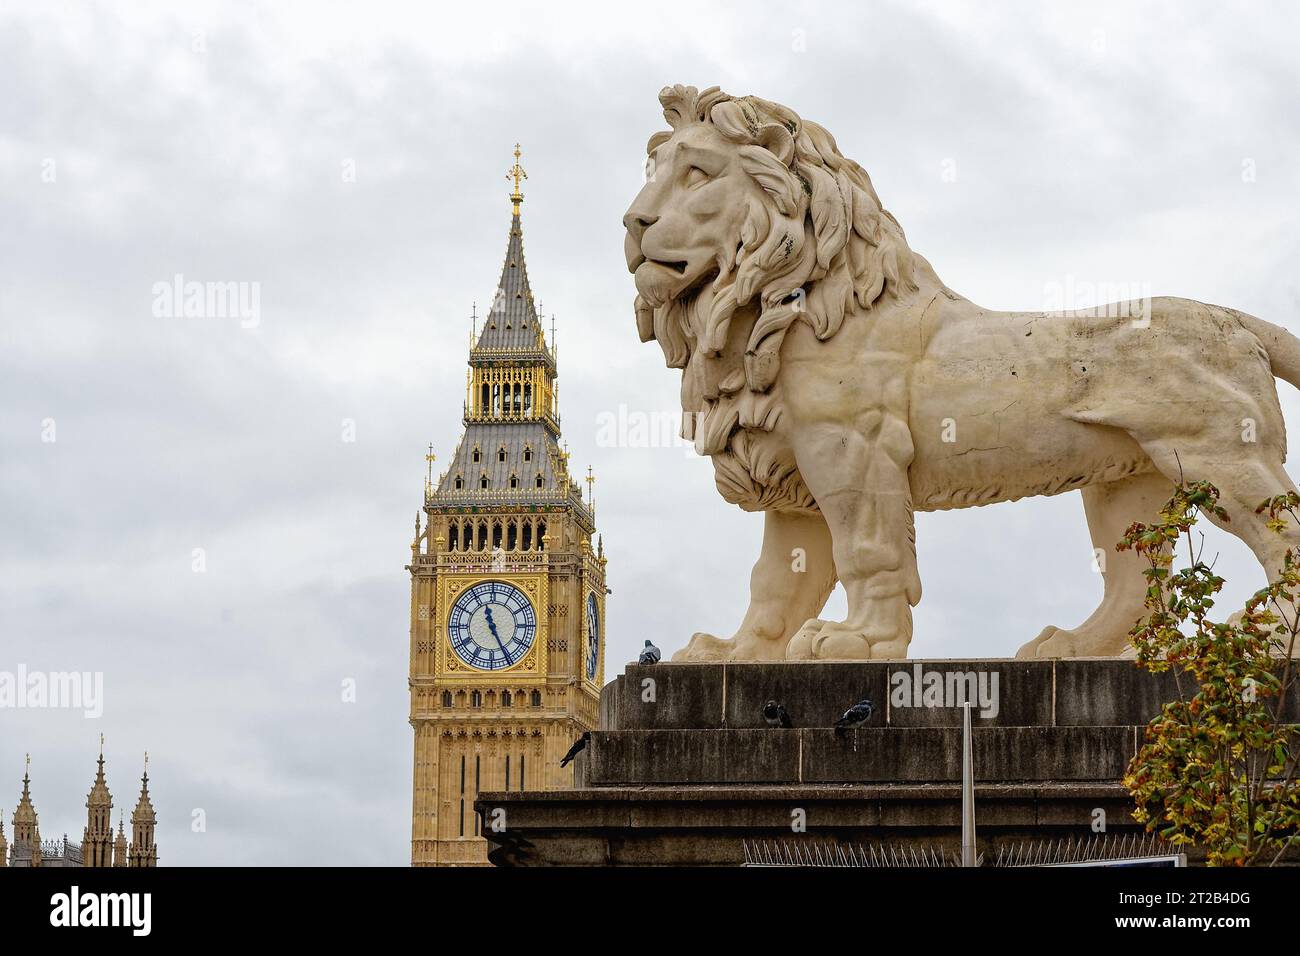 Close up of a large stone lion statue with the tower of Big Ben and clock in the background, Central London England UK Stock Photo